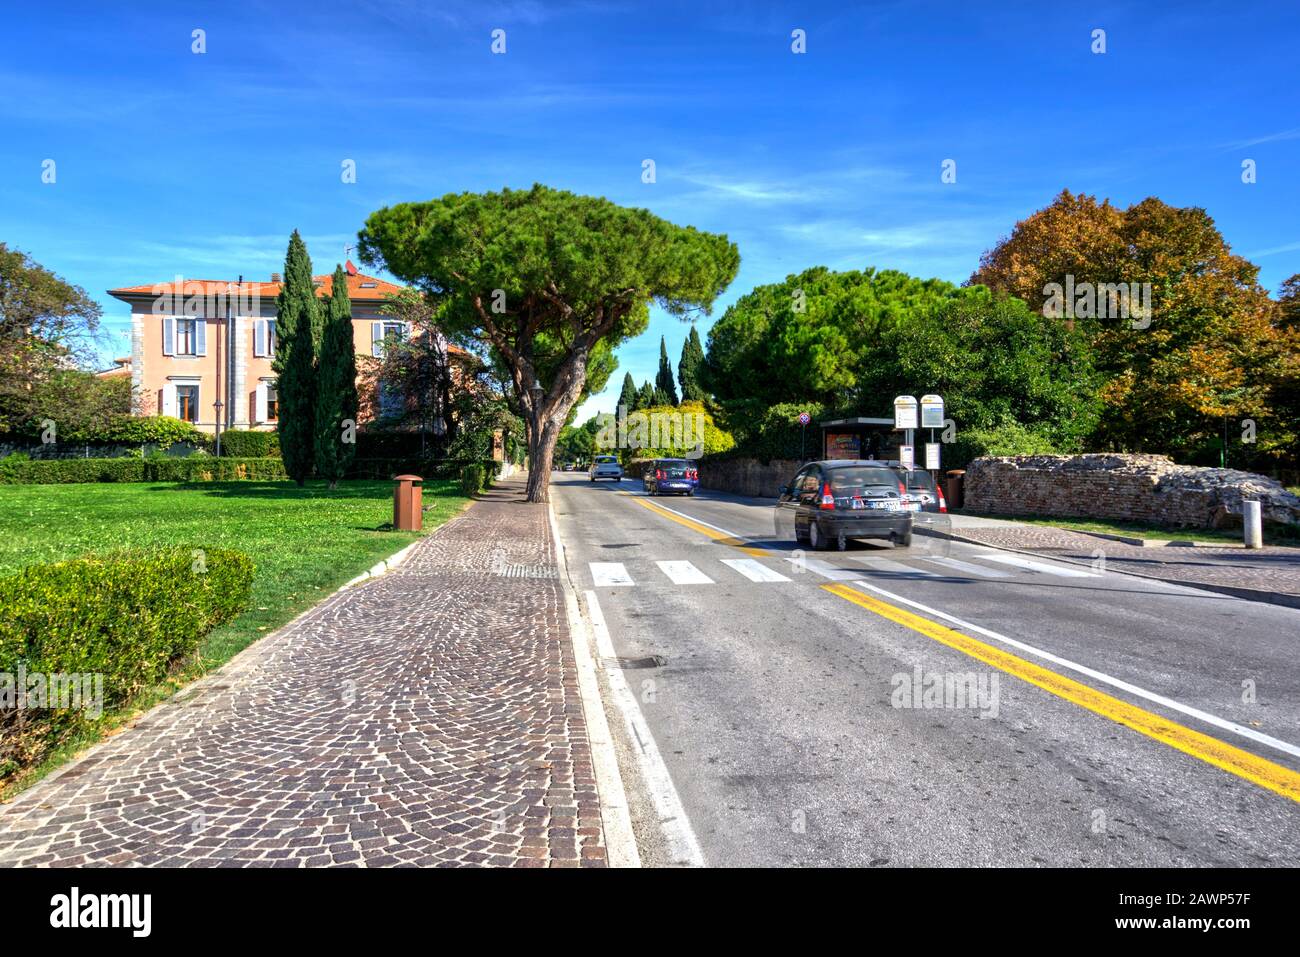 Rimini, Italy - October 20, 2019: Pretty pink house with attractive trees and vegetation, paved walkway and road with motion blurred cars Stock Photo